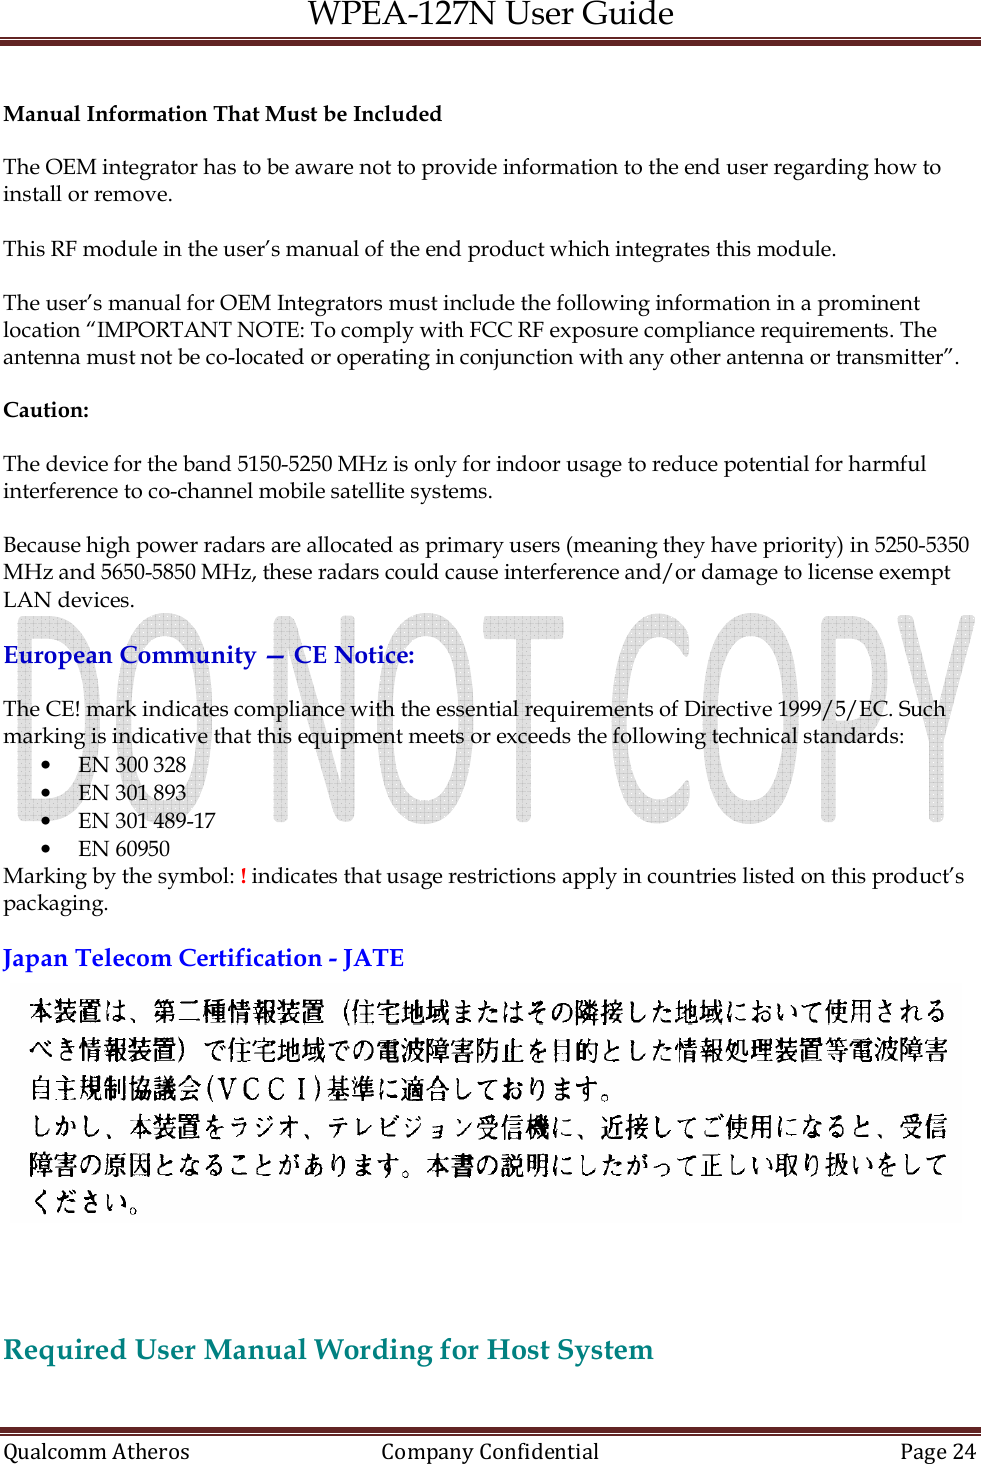 WPEA-127N User Guide  Qualcomm Atheros   Company Confidential  Page 24   Manual Information That Must be Included  The OEM integrator has to be aware not to provide information to the end user regarding how to install or remove.  This RF module in the user’s manual of the end product which integrates this module.  The user’s manual for OEM Integrators must include the following information in a prominent location “IMPORTANT NOTE: To comply with FCC RF exposure compliance requirements. The antenna must not be co-located or operating in conjunction with any other antenna or transmitter”.  Caution:   The device for the band 5150-5250 MHz is only for indoor usage to reduce potential for harmful interference to co-channel mobile satellite systems.  Because high power radars are allocated as primary users (meaning they have priority) in 5250-5350 MHz and 5650-5850 MHz, these radars could cause interference and/or damage to license exempt LAN devices.  European Community — CE Notice:  The CE! mark indicates compliance with the essential requirements of Directive 1999/5/EC. Such marking is indicative that this equipment meets or exceeds the following technical standards: • EN 300 328 • EN 301 893 • EN 301 489-17 • EN 60950 Marking by the symbol: ! indicates that usage restrictions apply in countries listed on this product’s packaging.  Japan Telecom Certification - JATE   Required User Manual Wording for Host System  